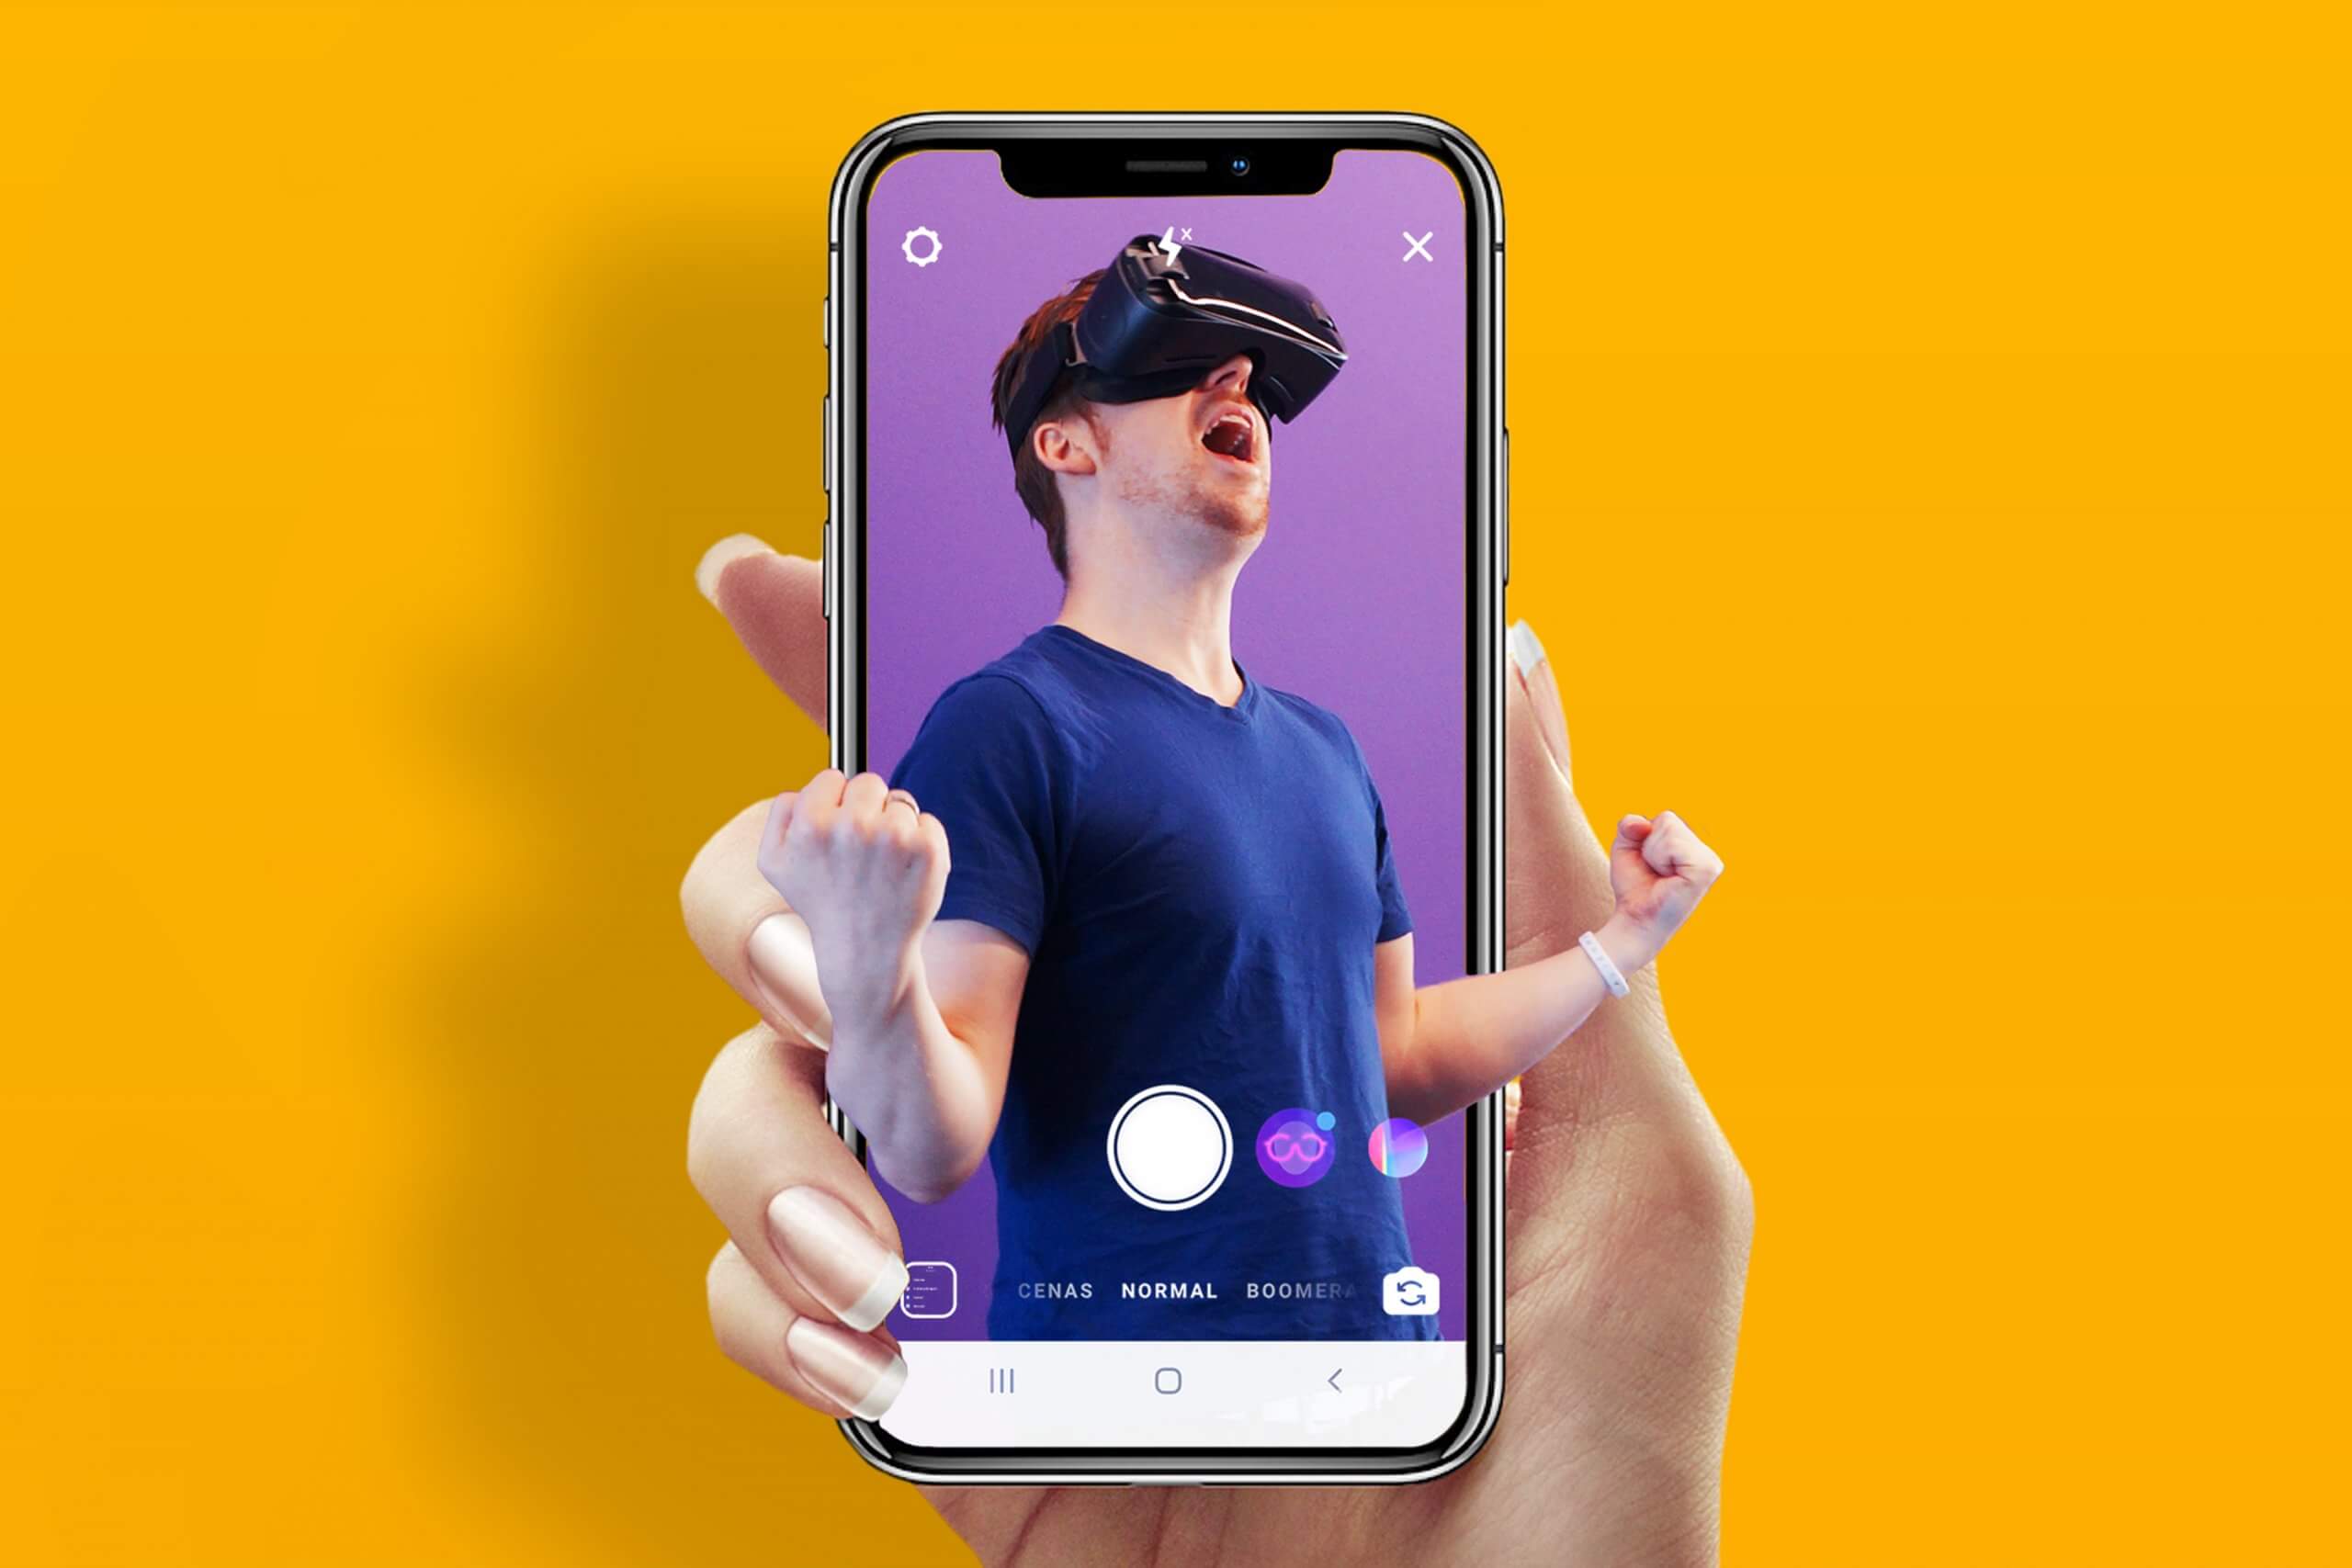 How to Run A Successful Instagram AR Filter Campaign